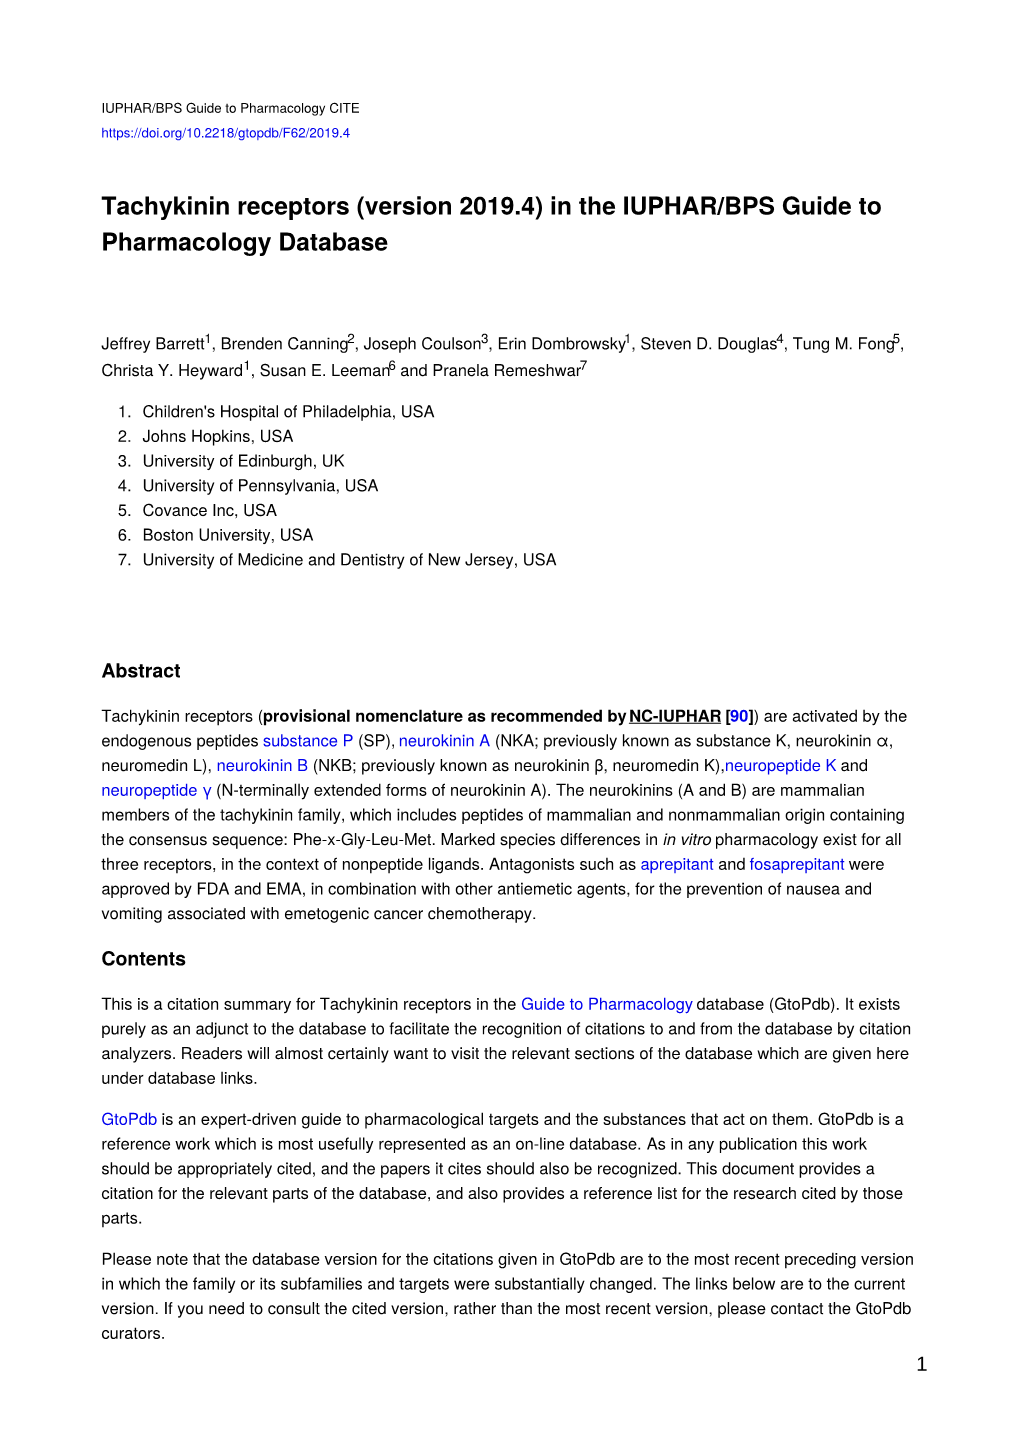 Tachykinin Receptors (Version 2019.4) in the IUPHAR/BPS Guide to Pharmacology Database